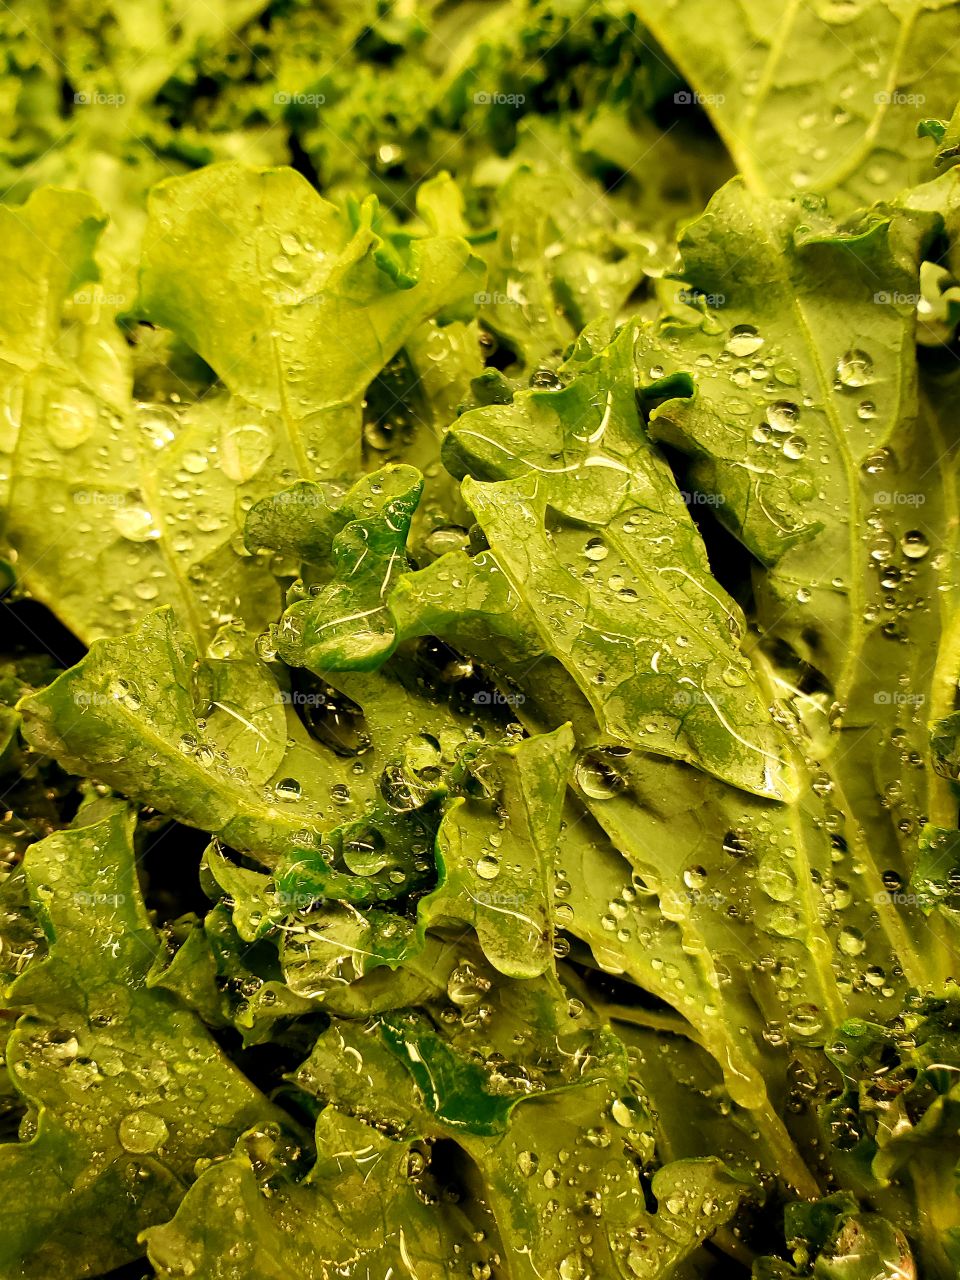 Closeup details and texture of water droplets on leafy green vegetables at the market